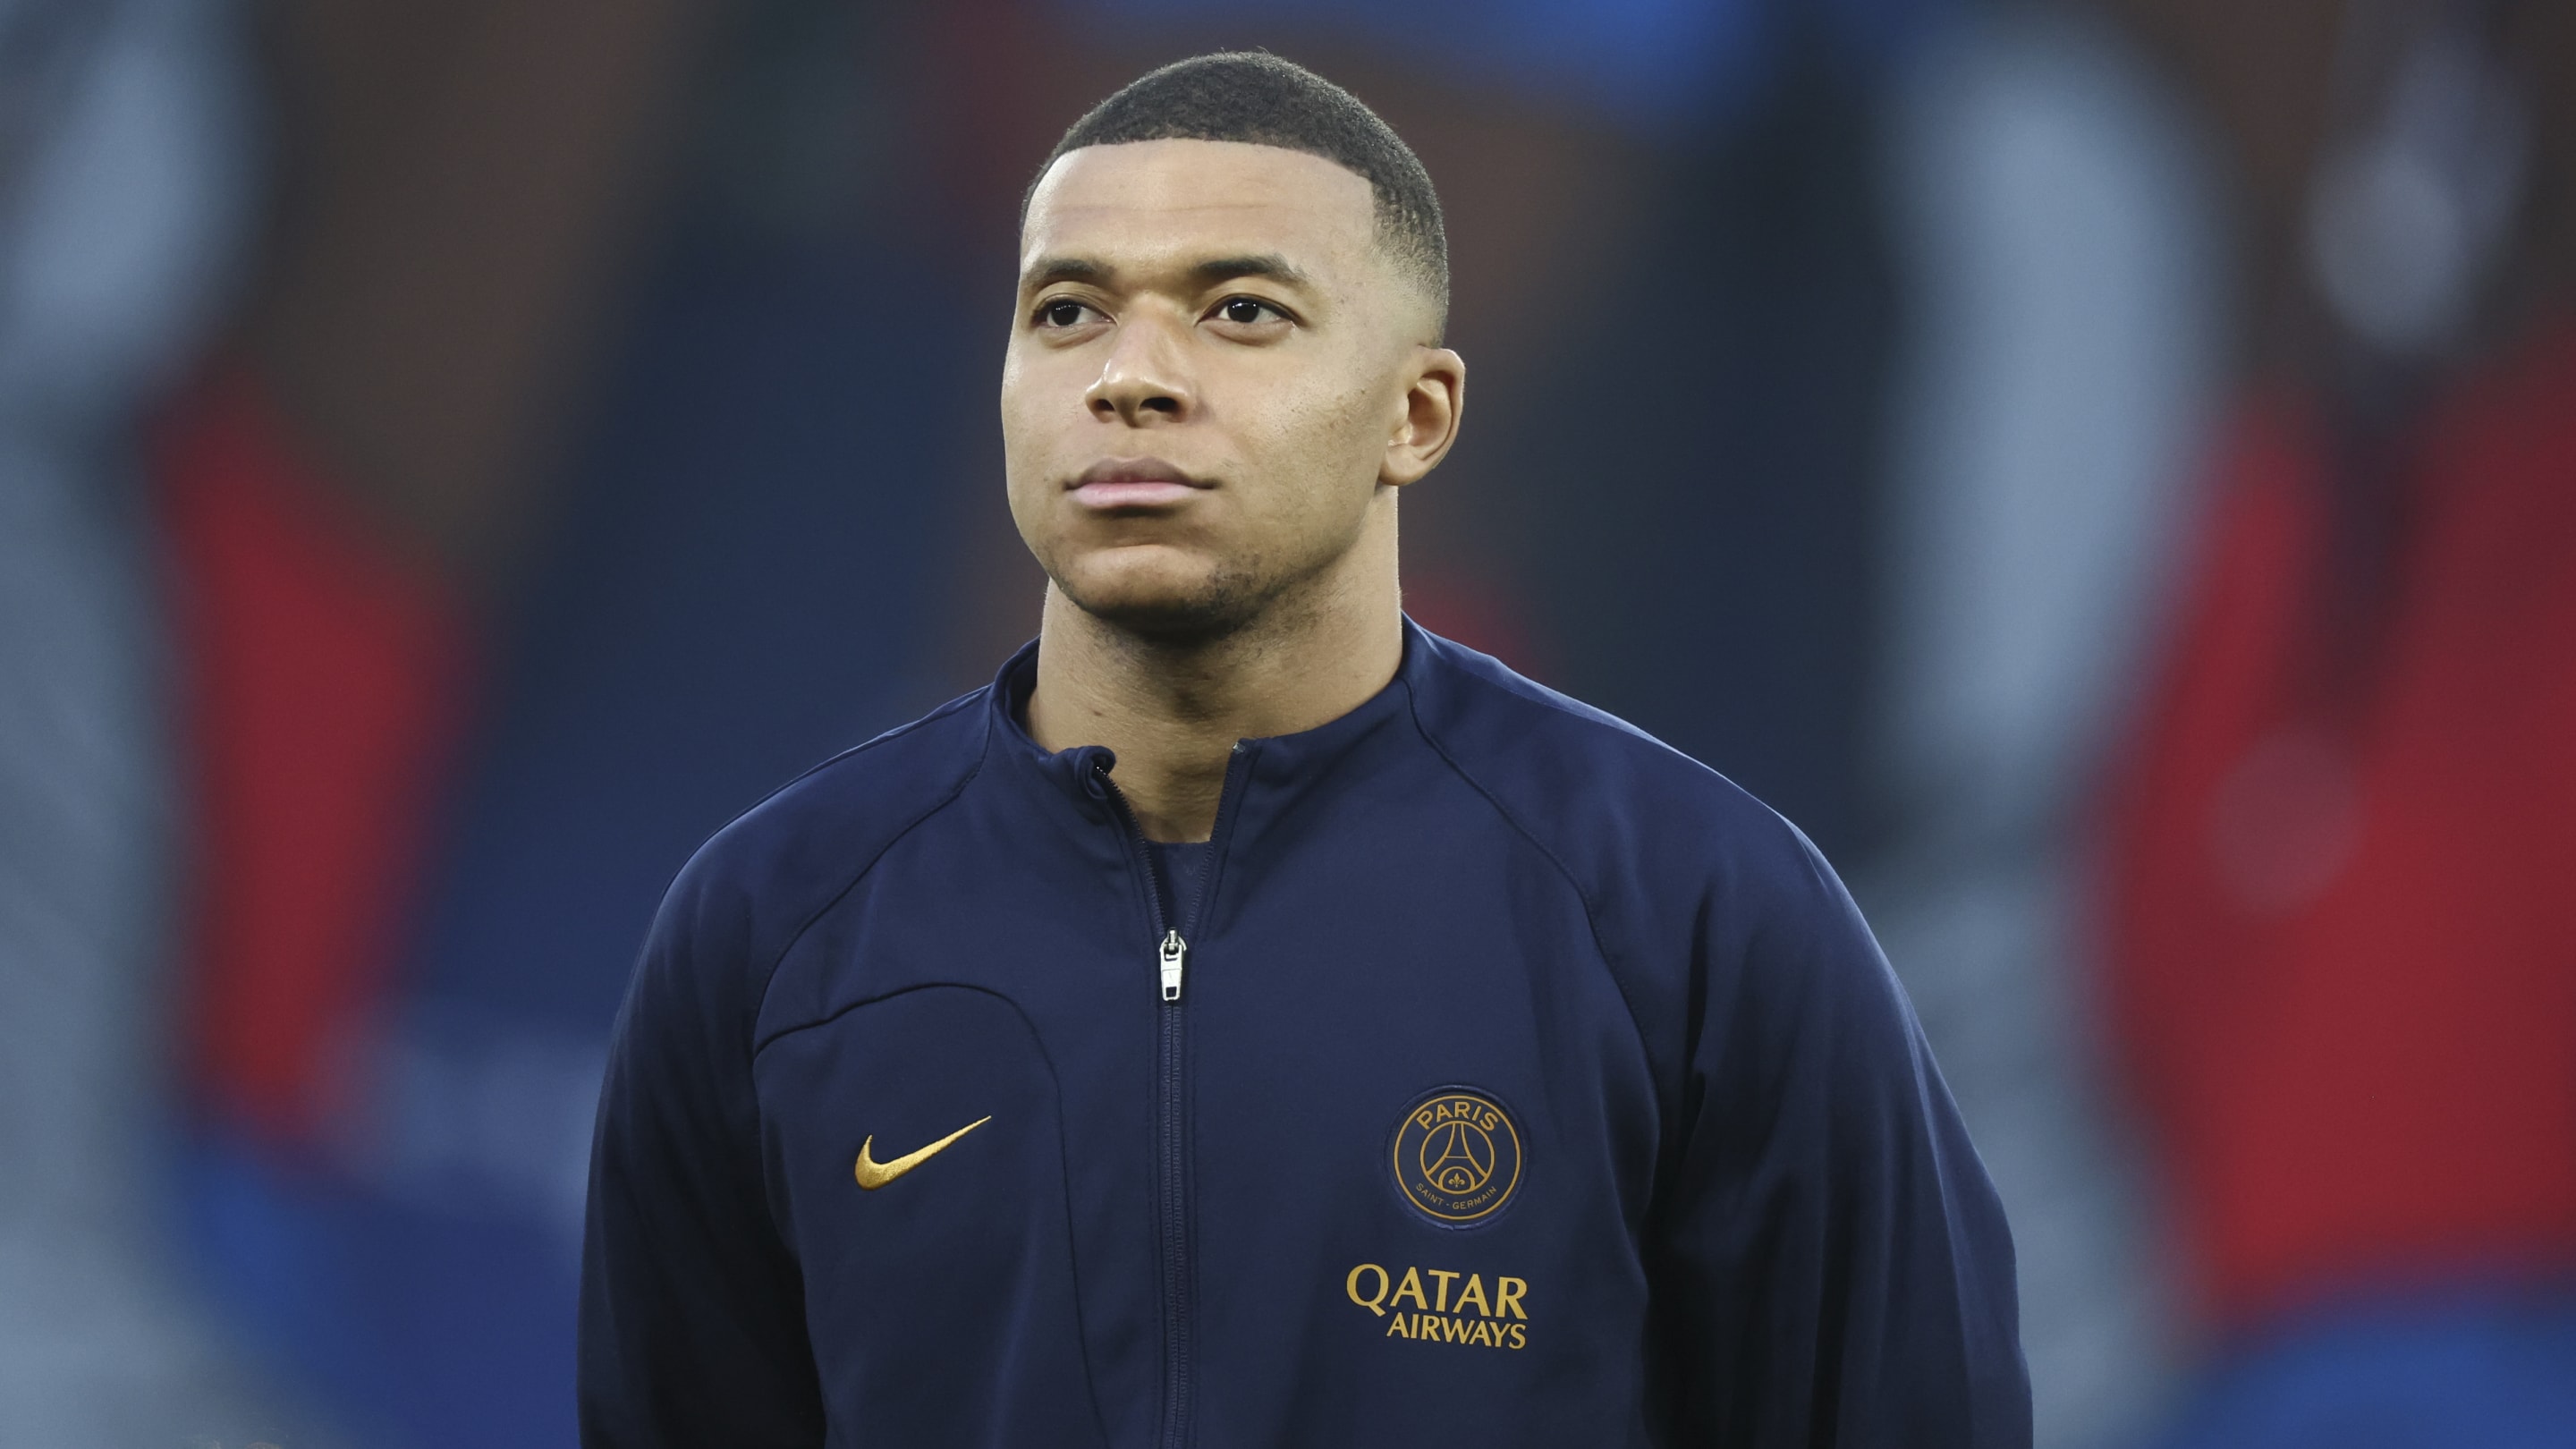 When Real Madrid plan to announce Kylian Mbappe signing - report